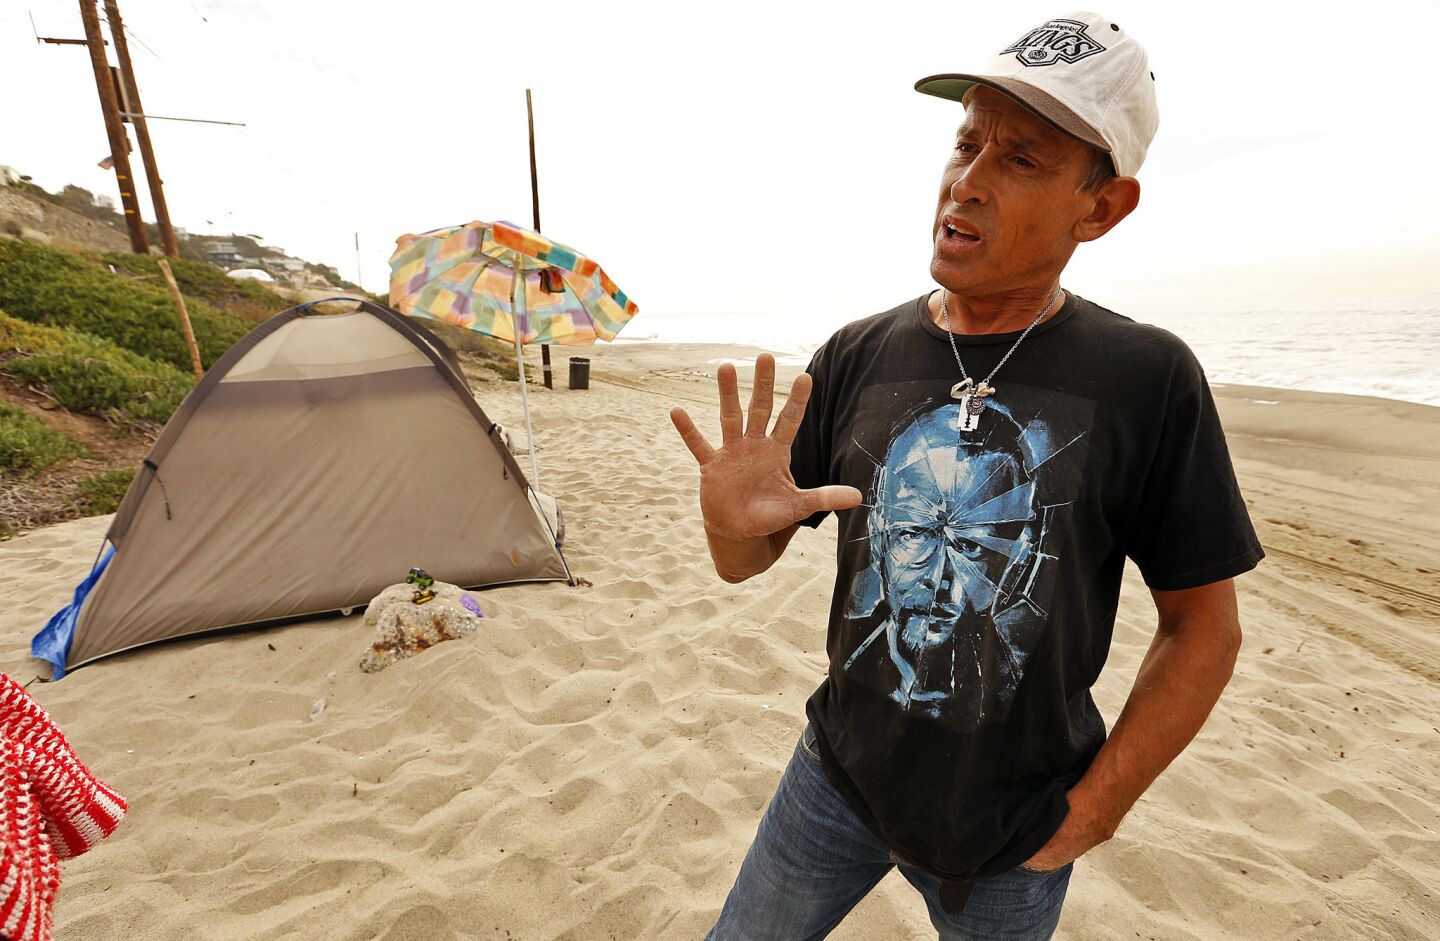 Michael Day, 46, sleeps along the sand of Will Rogers State Beach. He joins several other homeless individuals who are living in hidden encampments at the beach.